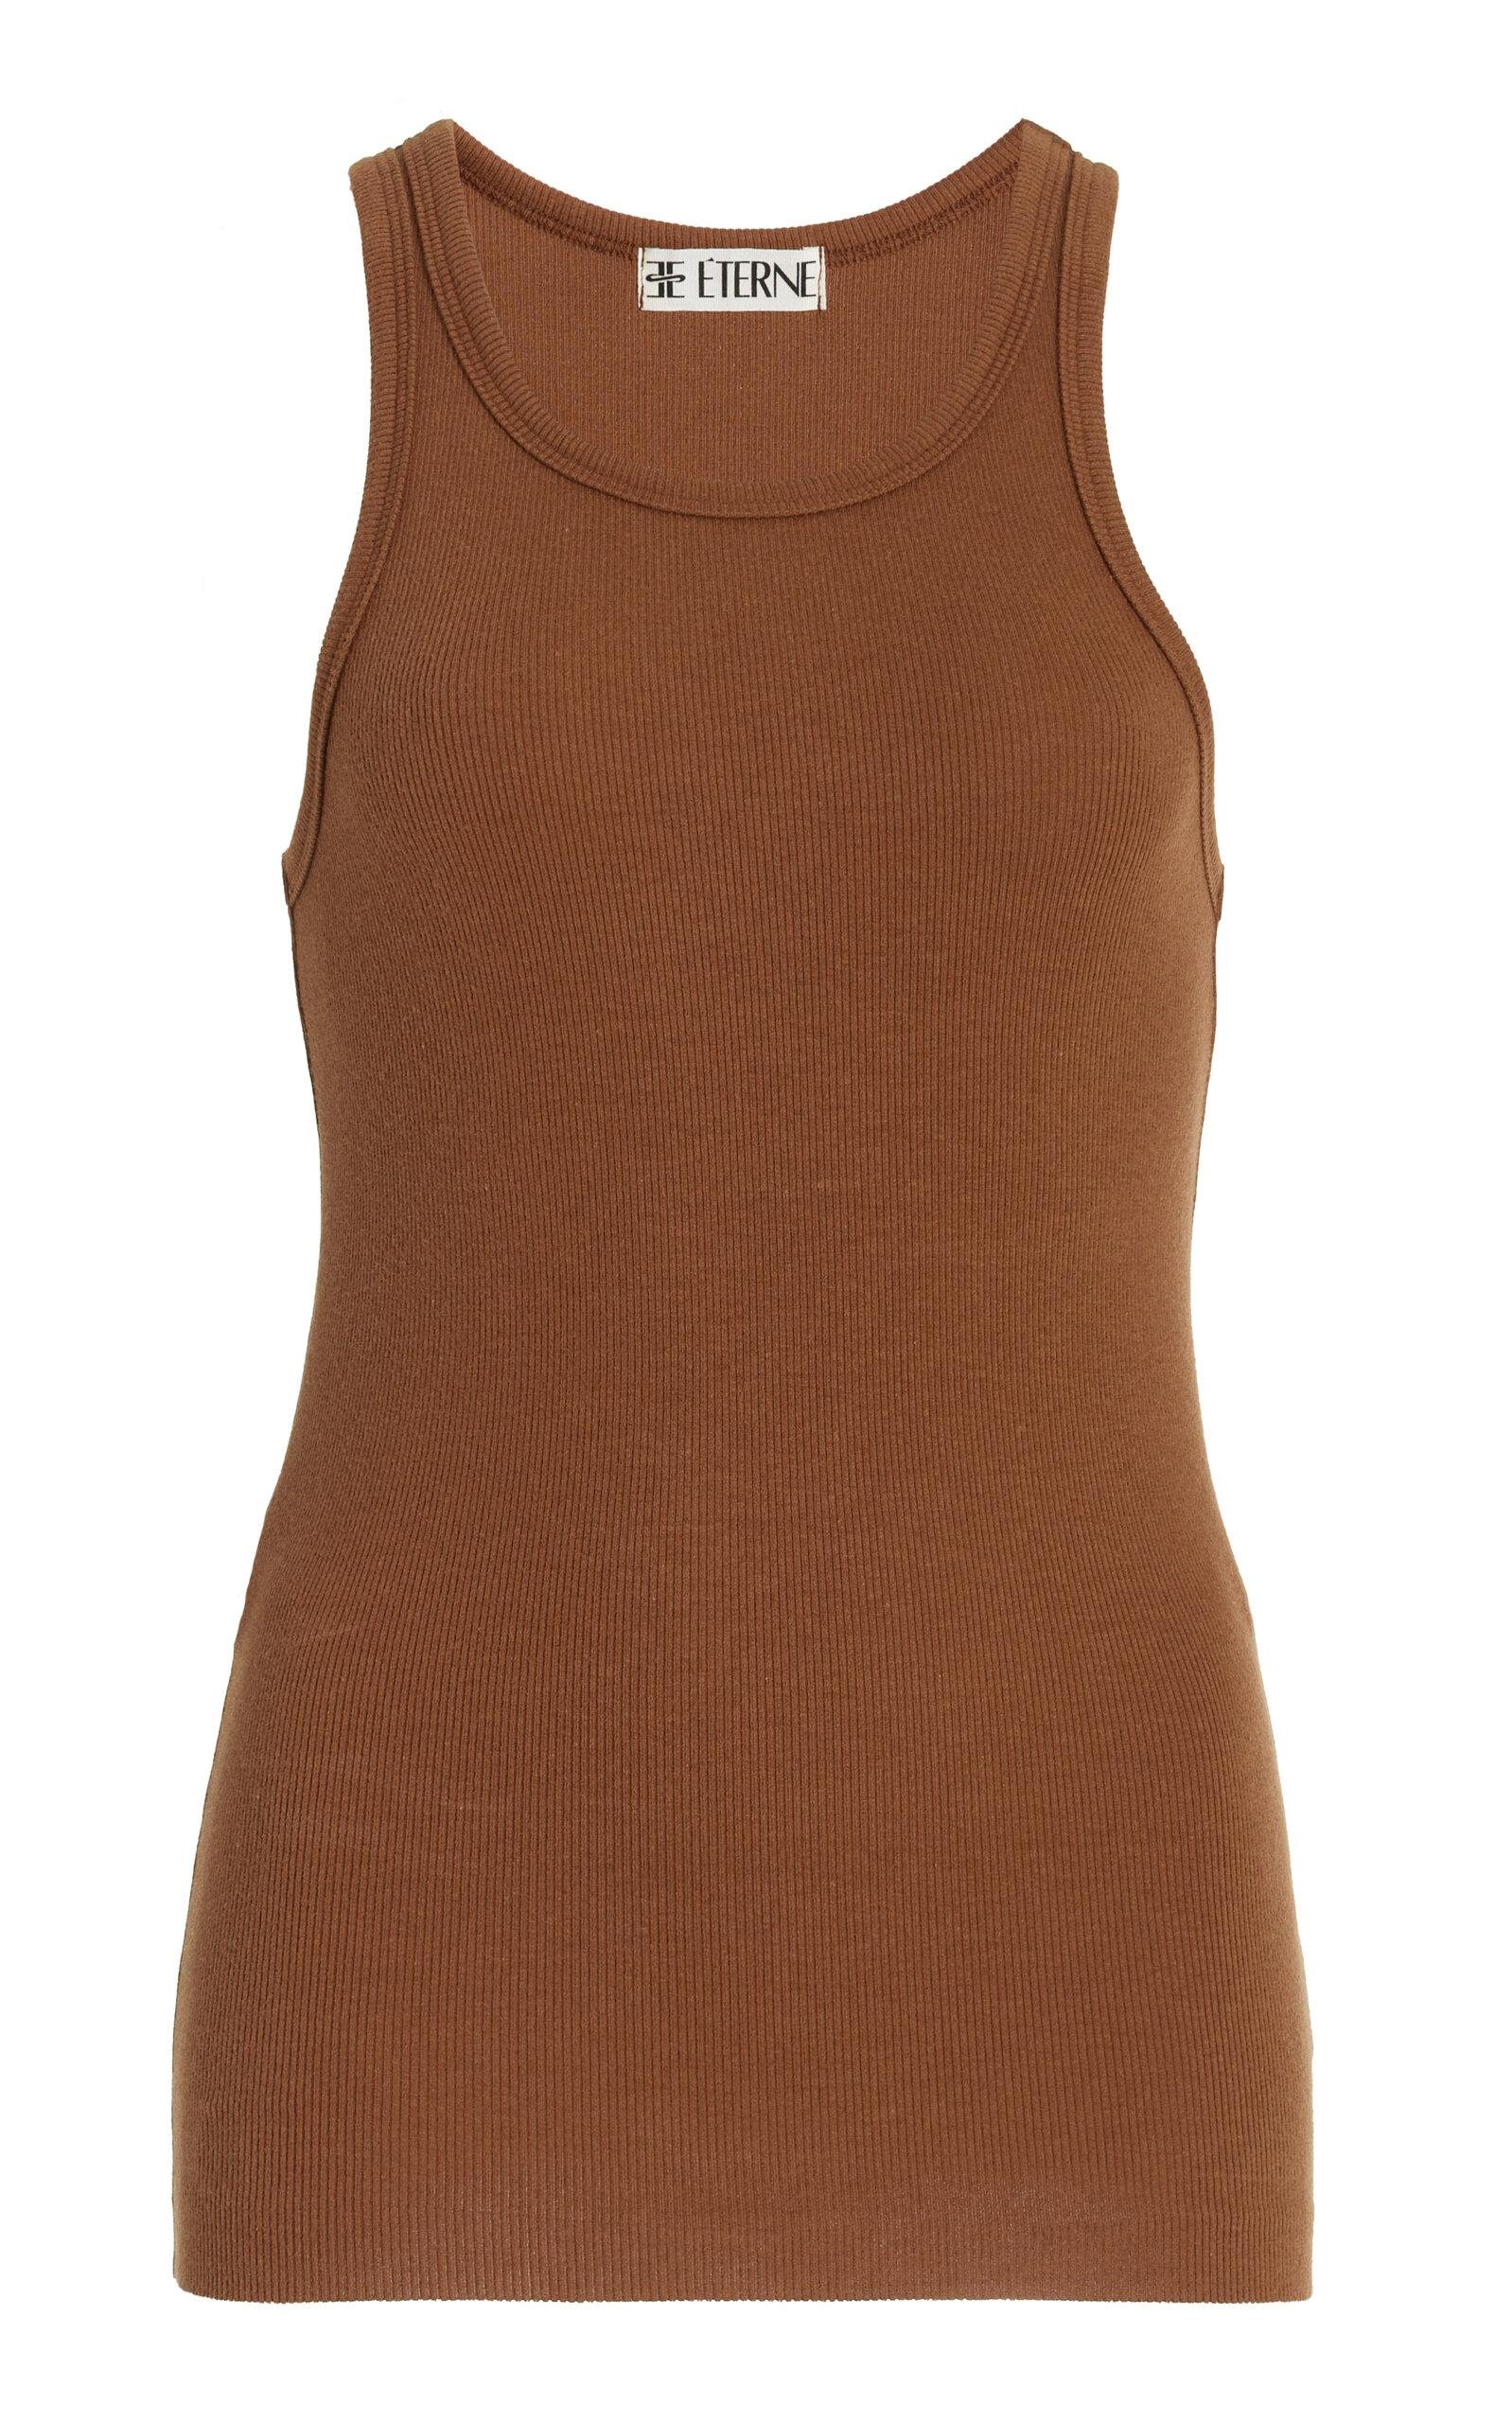 Éterne - High-Neck Fitted Jersey Tank Top - Brown - S - Moda Operandi by ETERNE